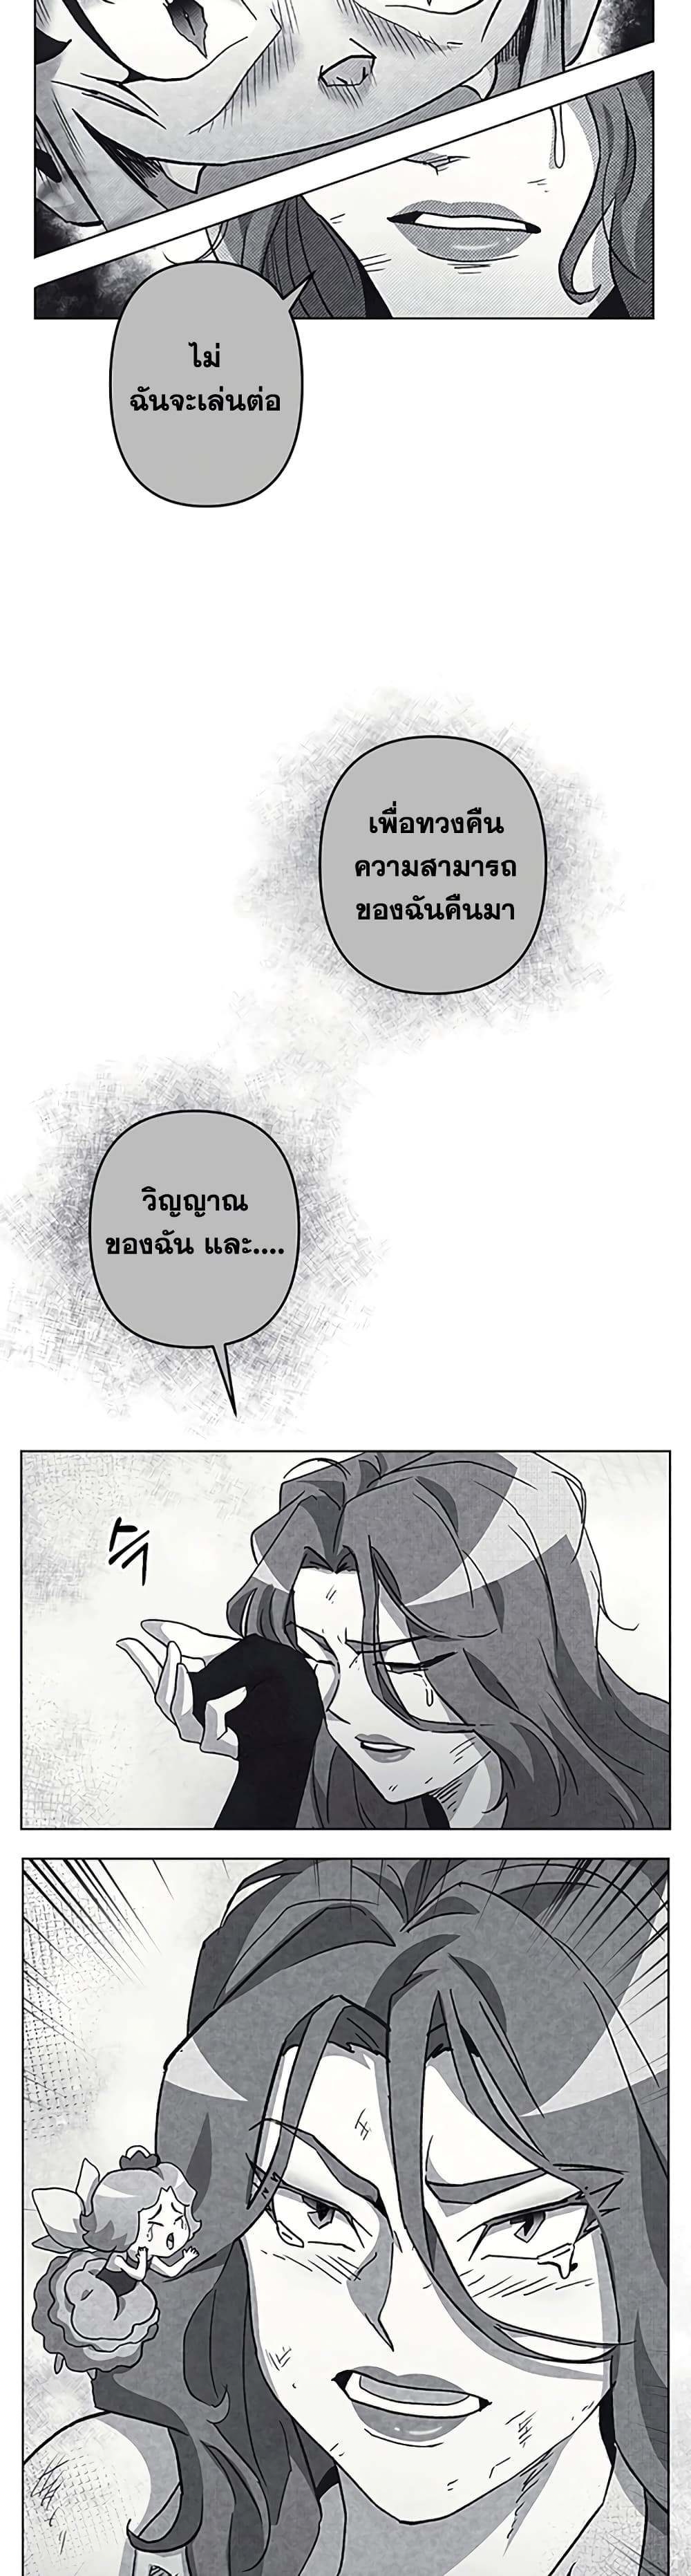 Surviving in an Action Manhwa21 (39)